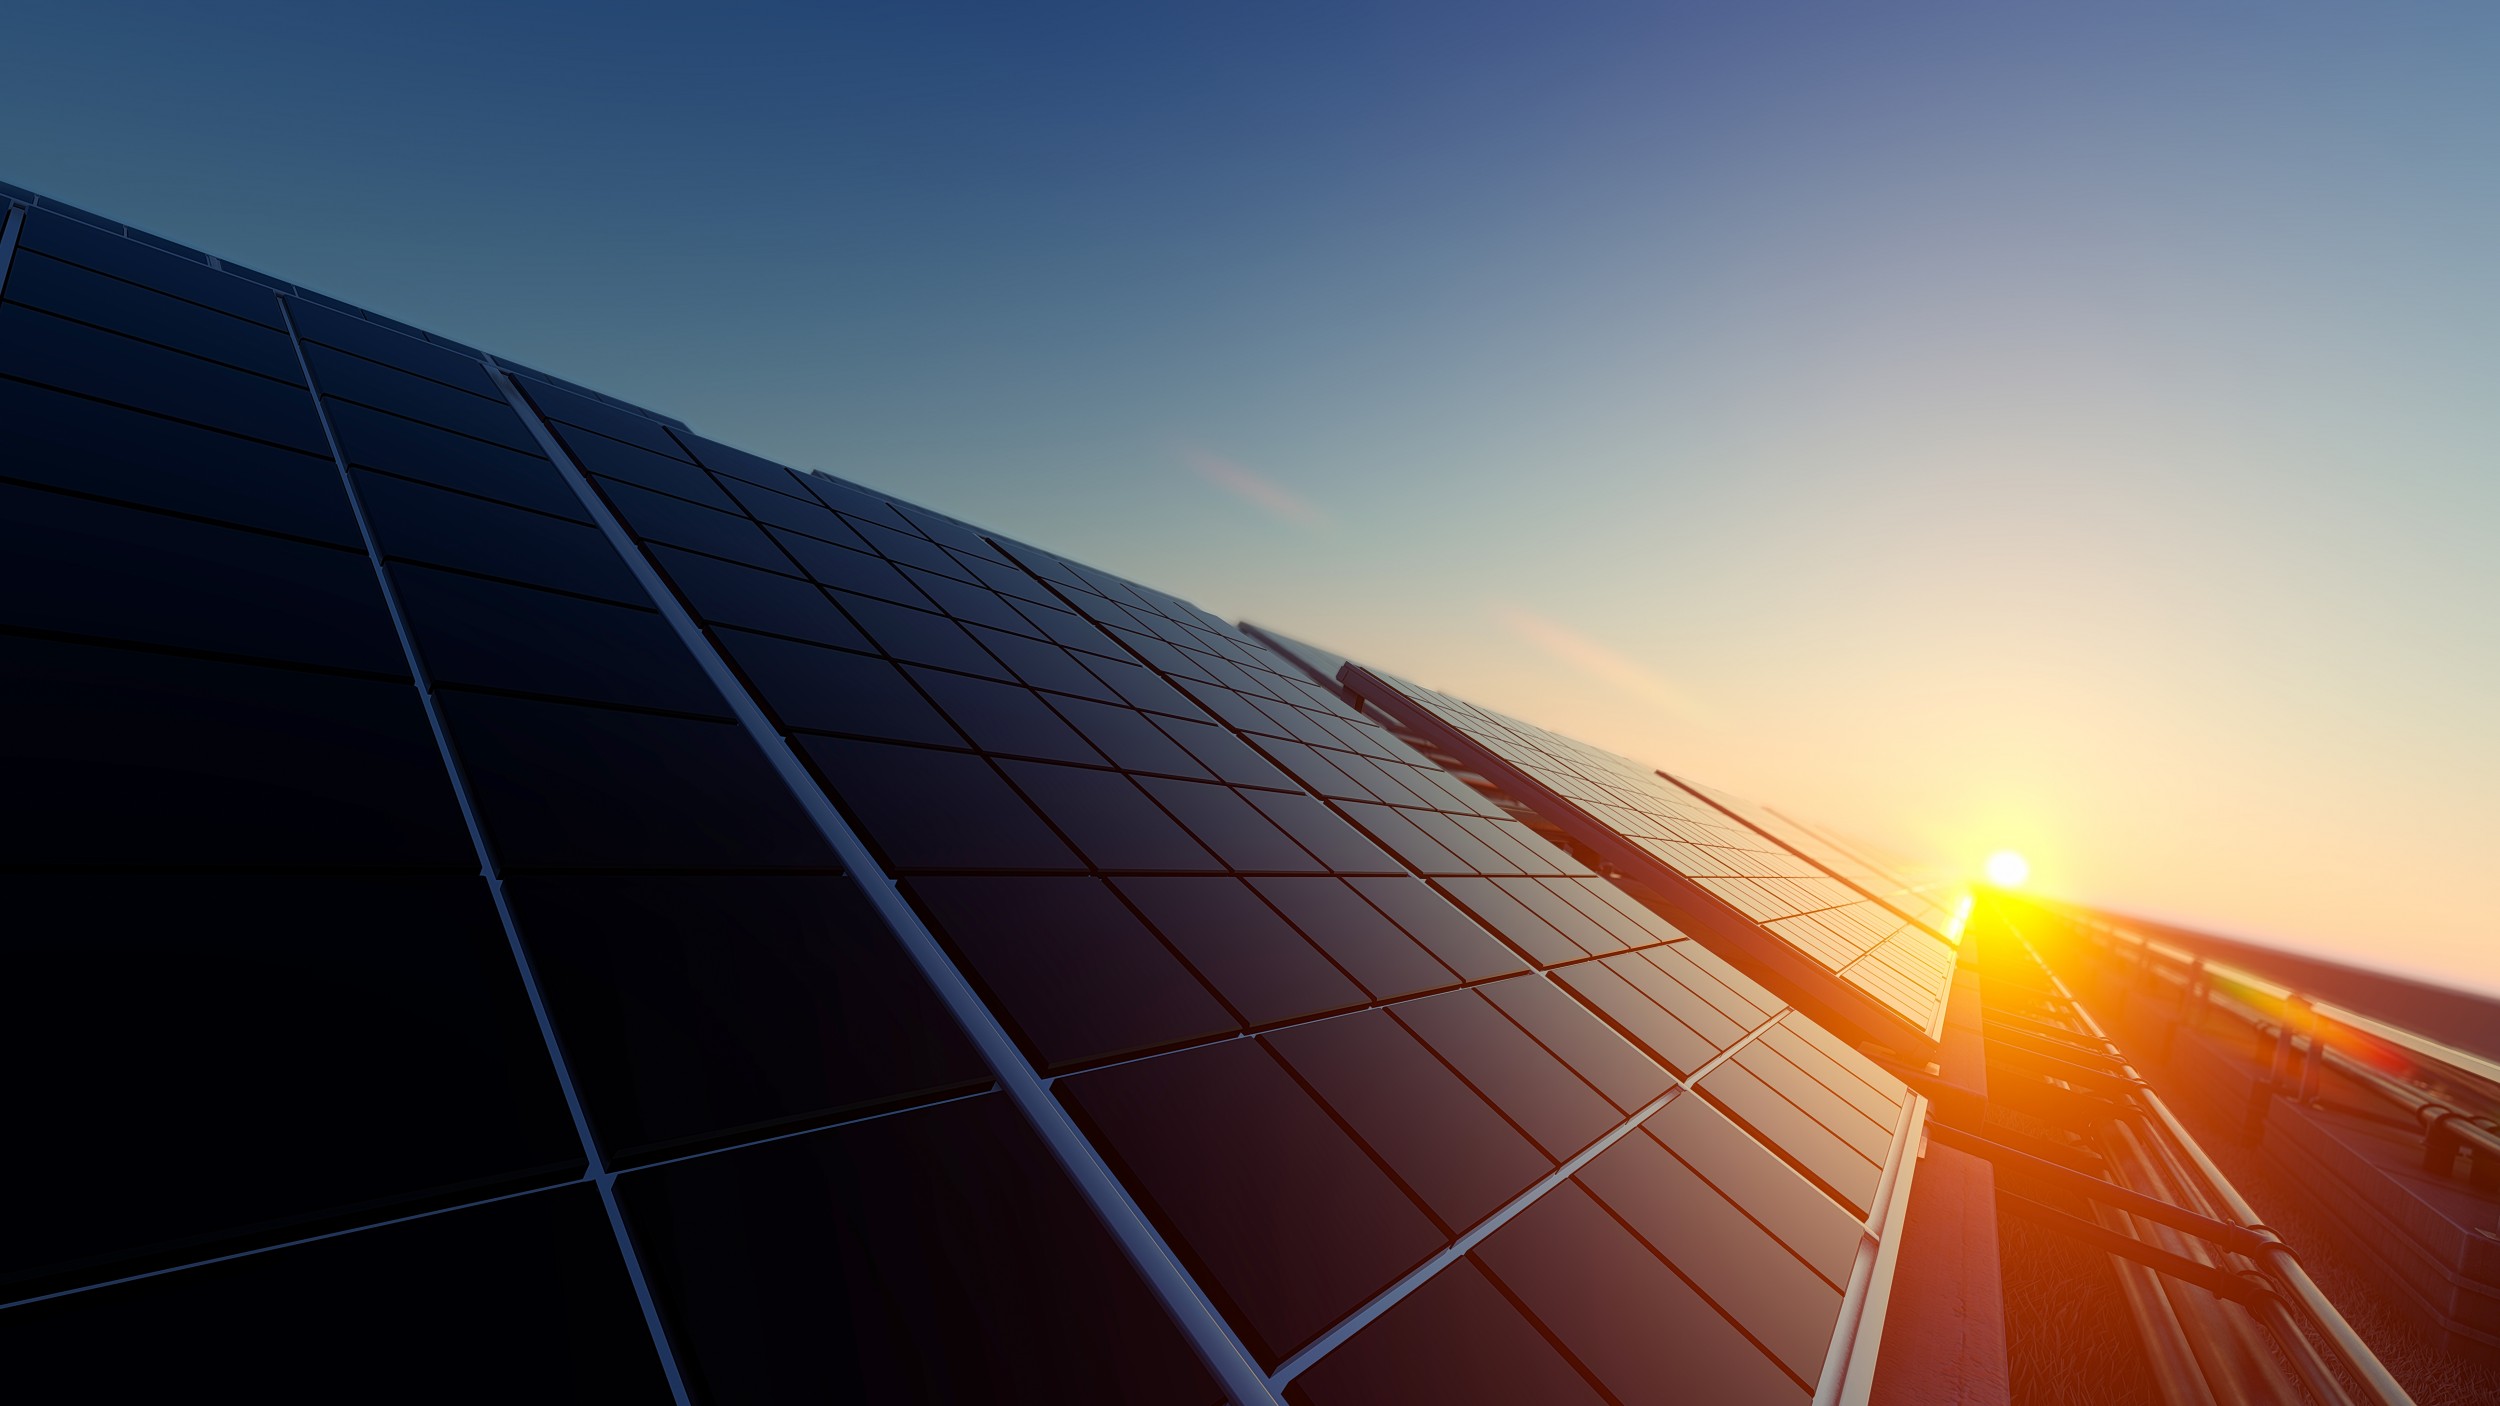 Photovoltaic systems could help decentralize energy generation